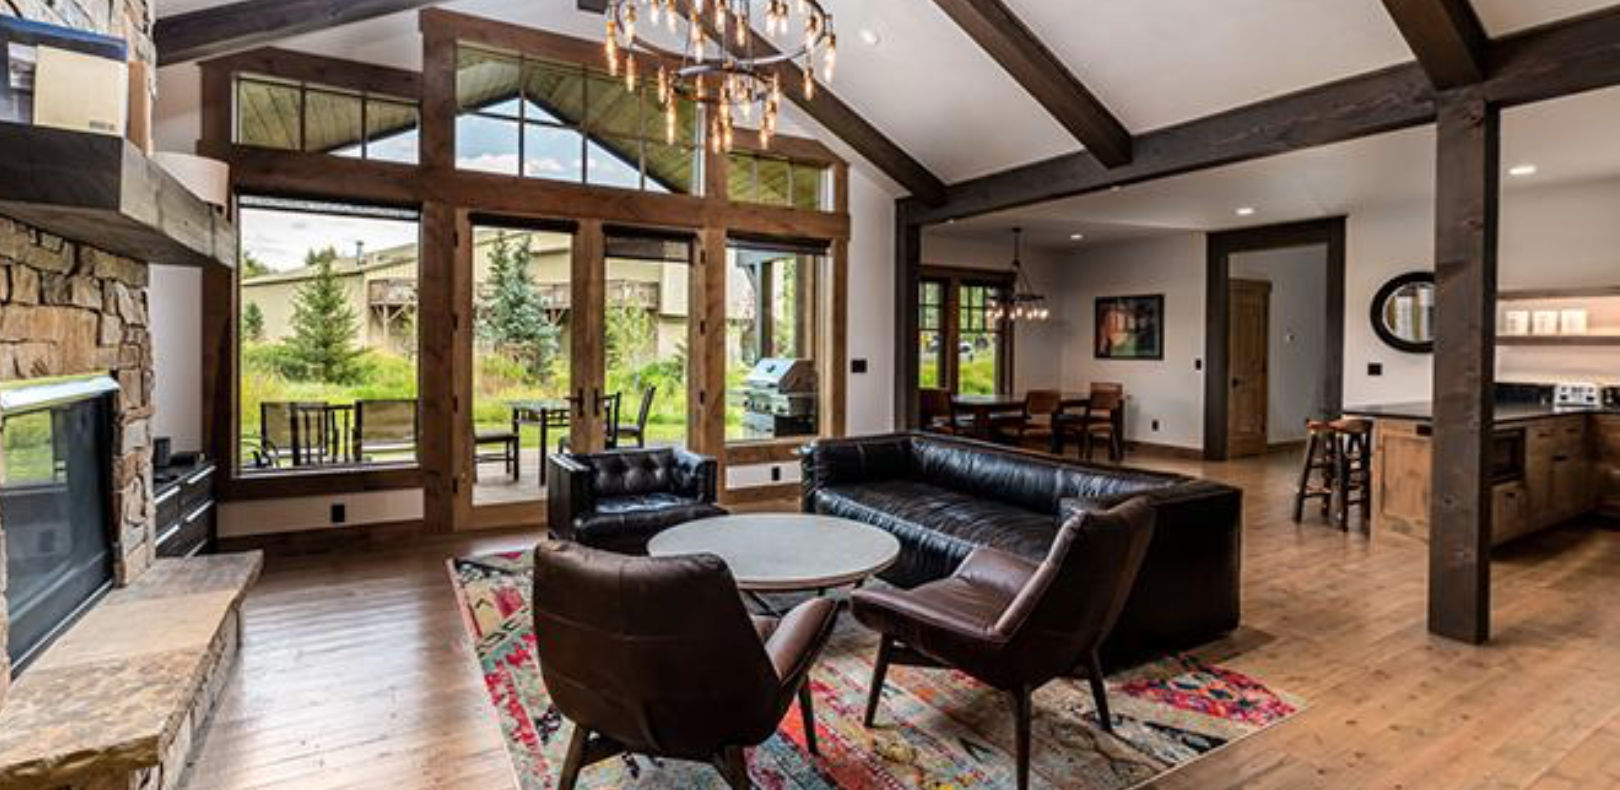 Luxury Home #17 at The Lodge at Whitefish Lake, Glacier National Park, Montana